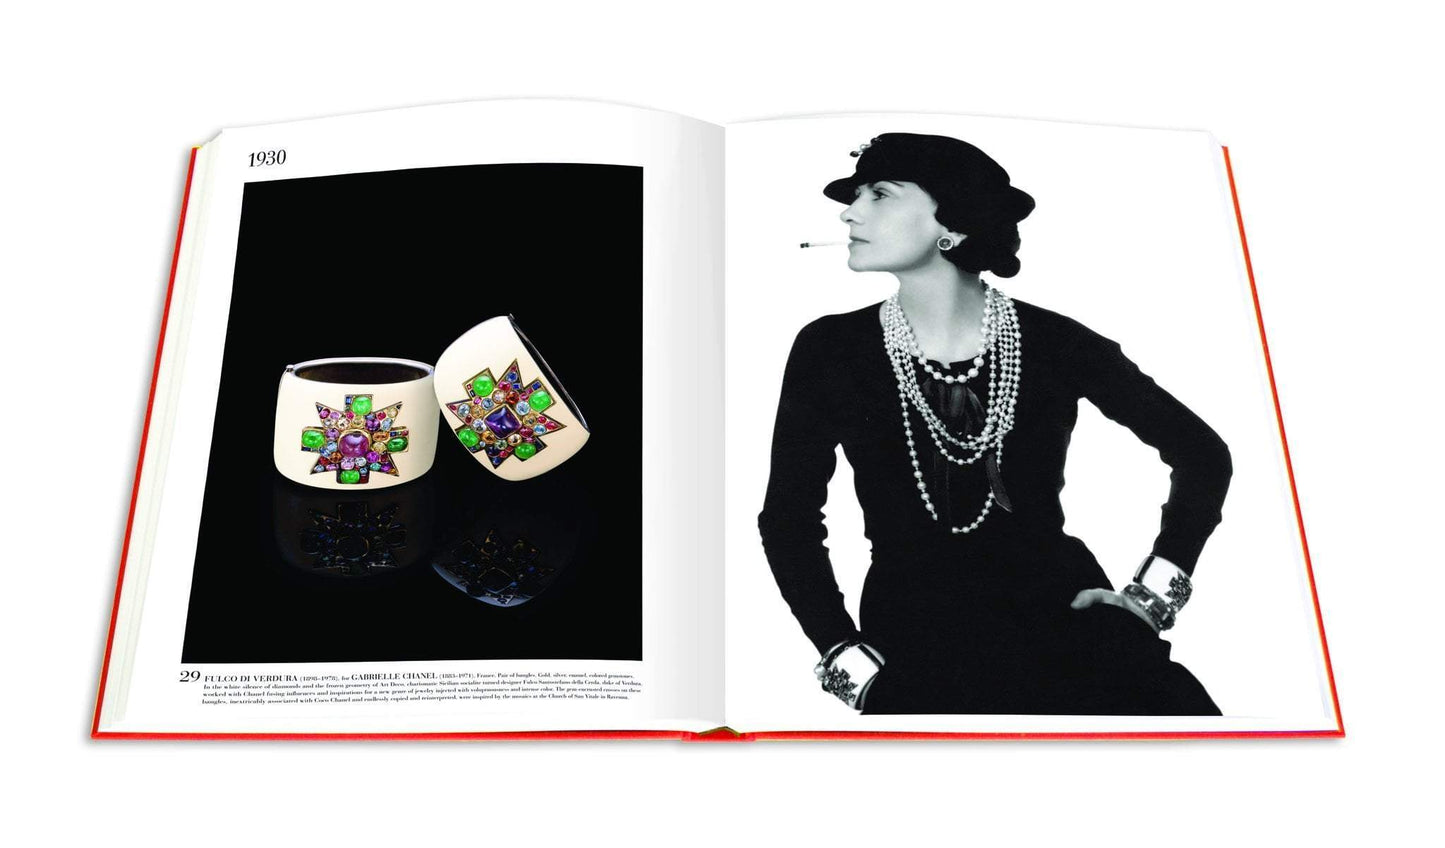 Book Jewelry: Impossible collection